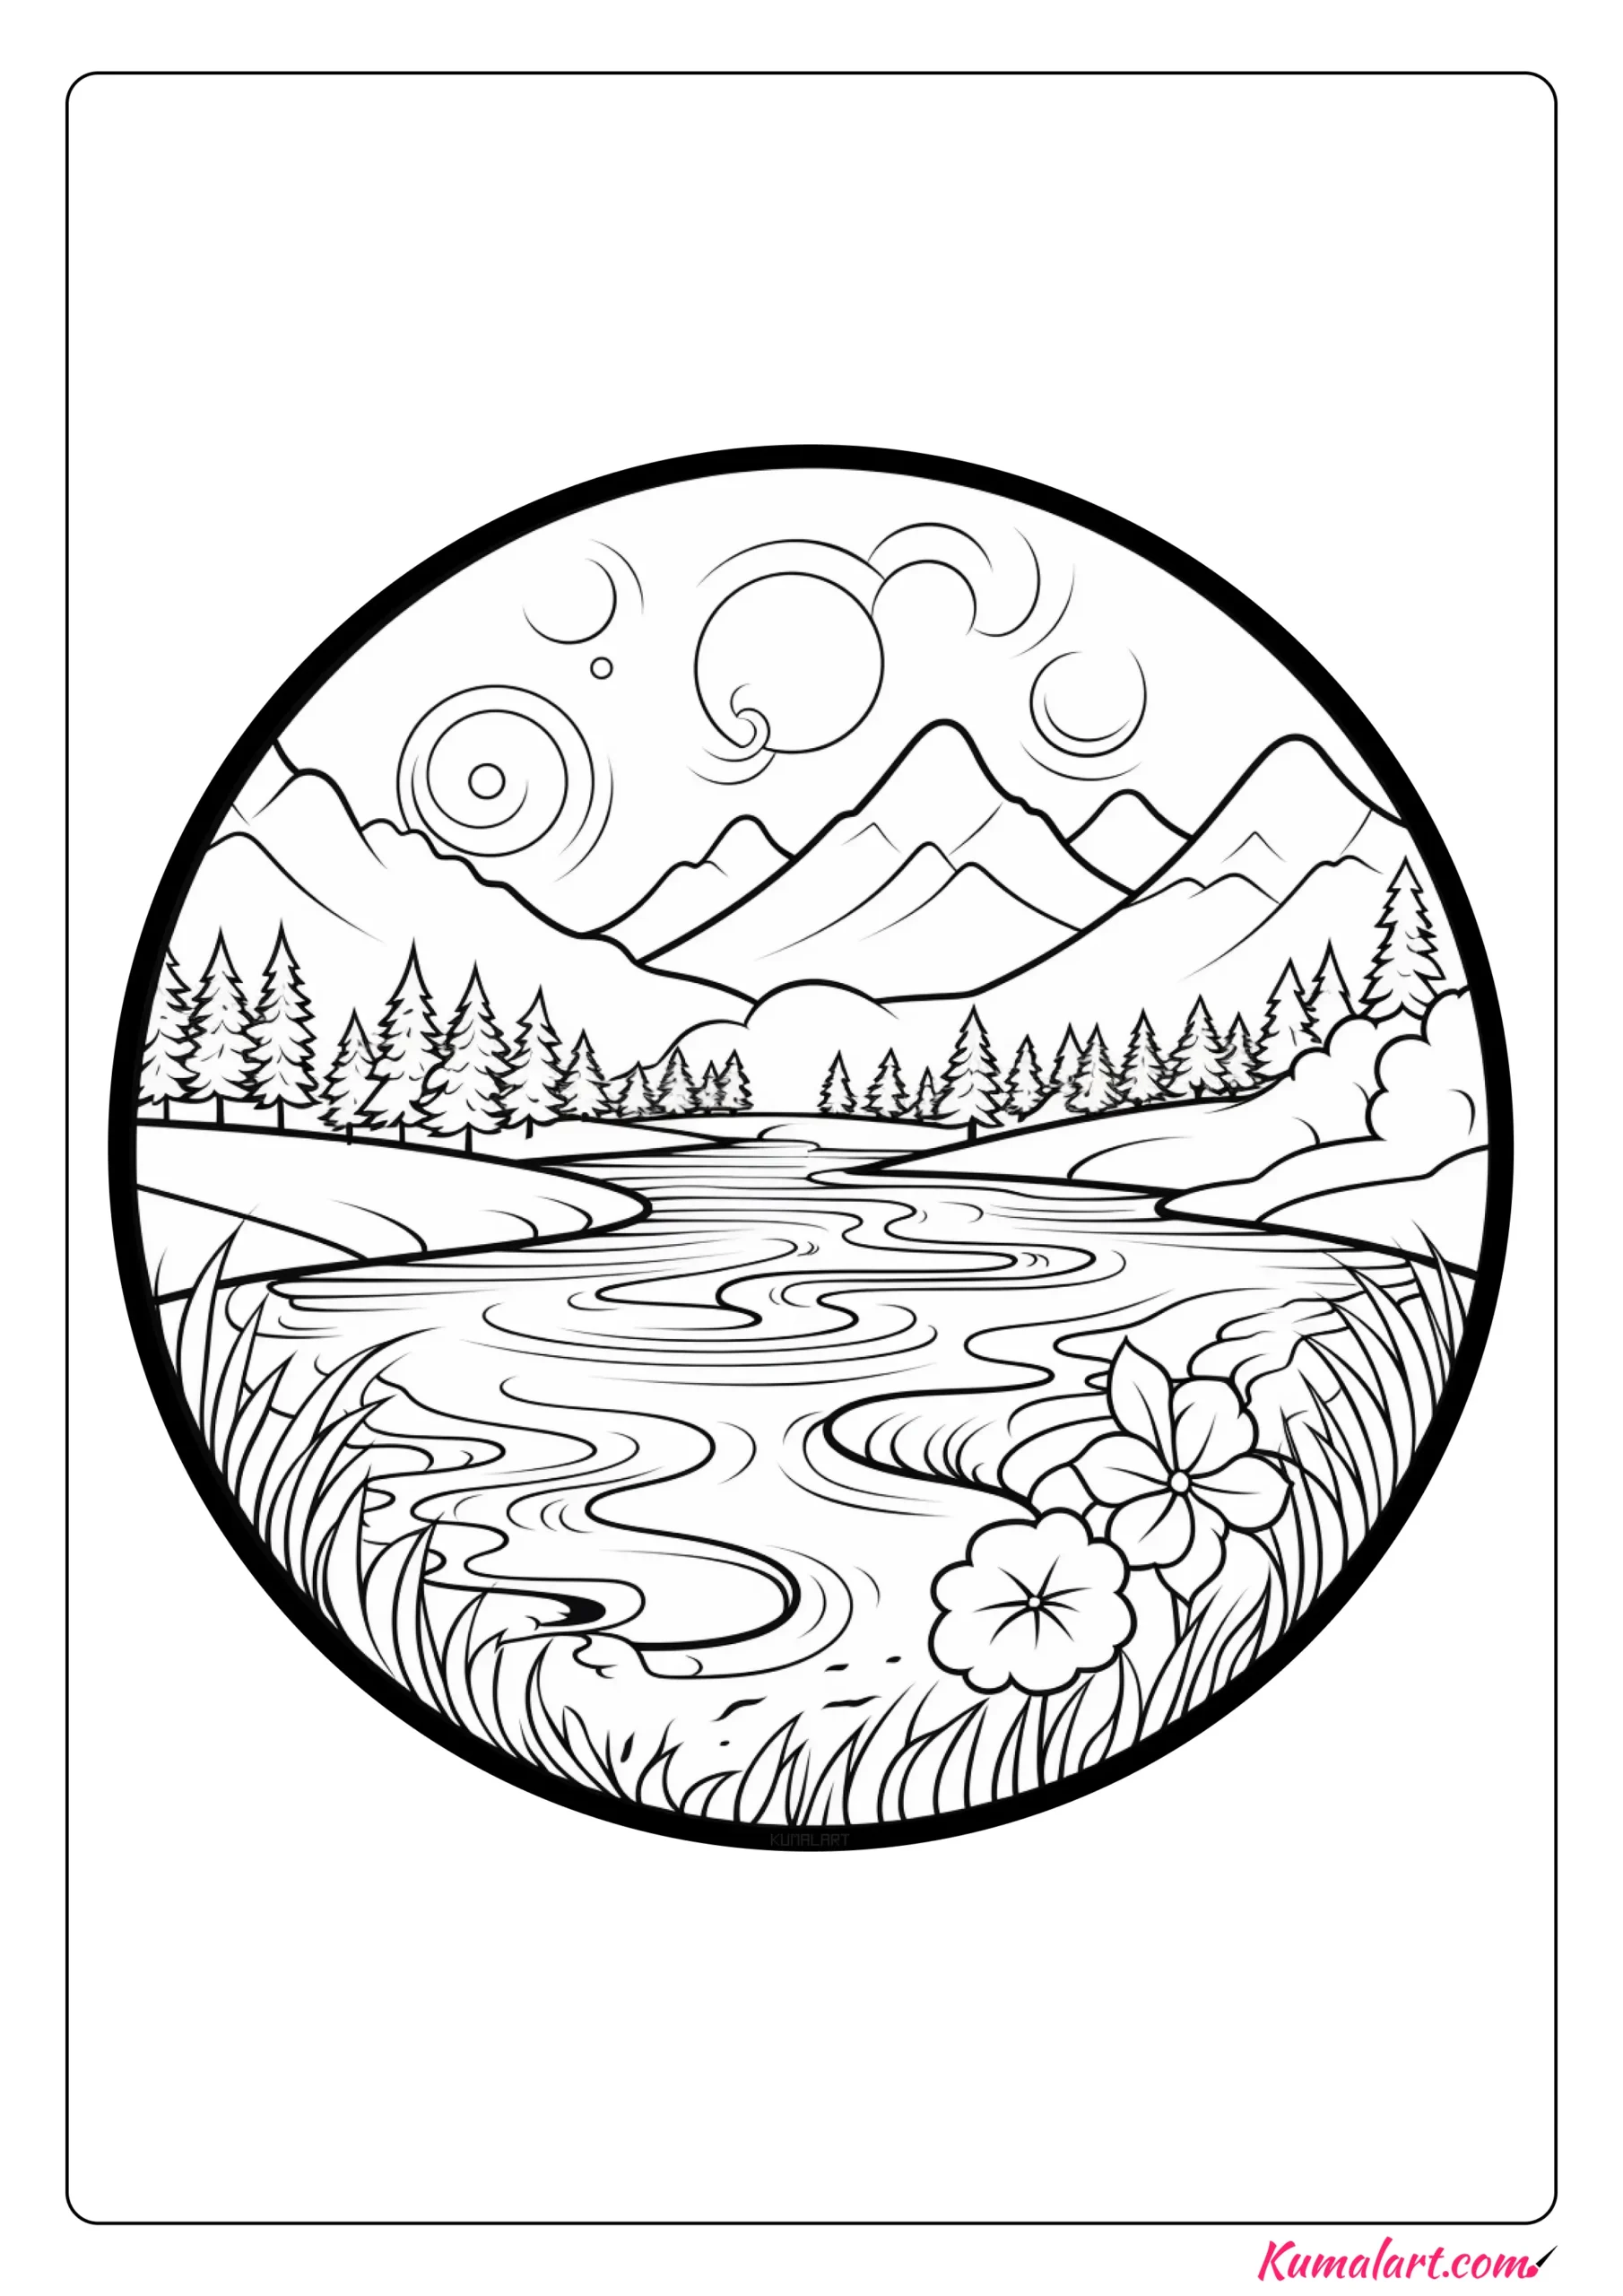 Lively River Coloring Page